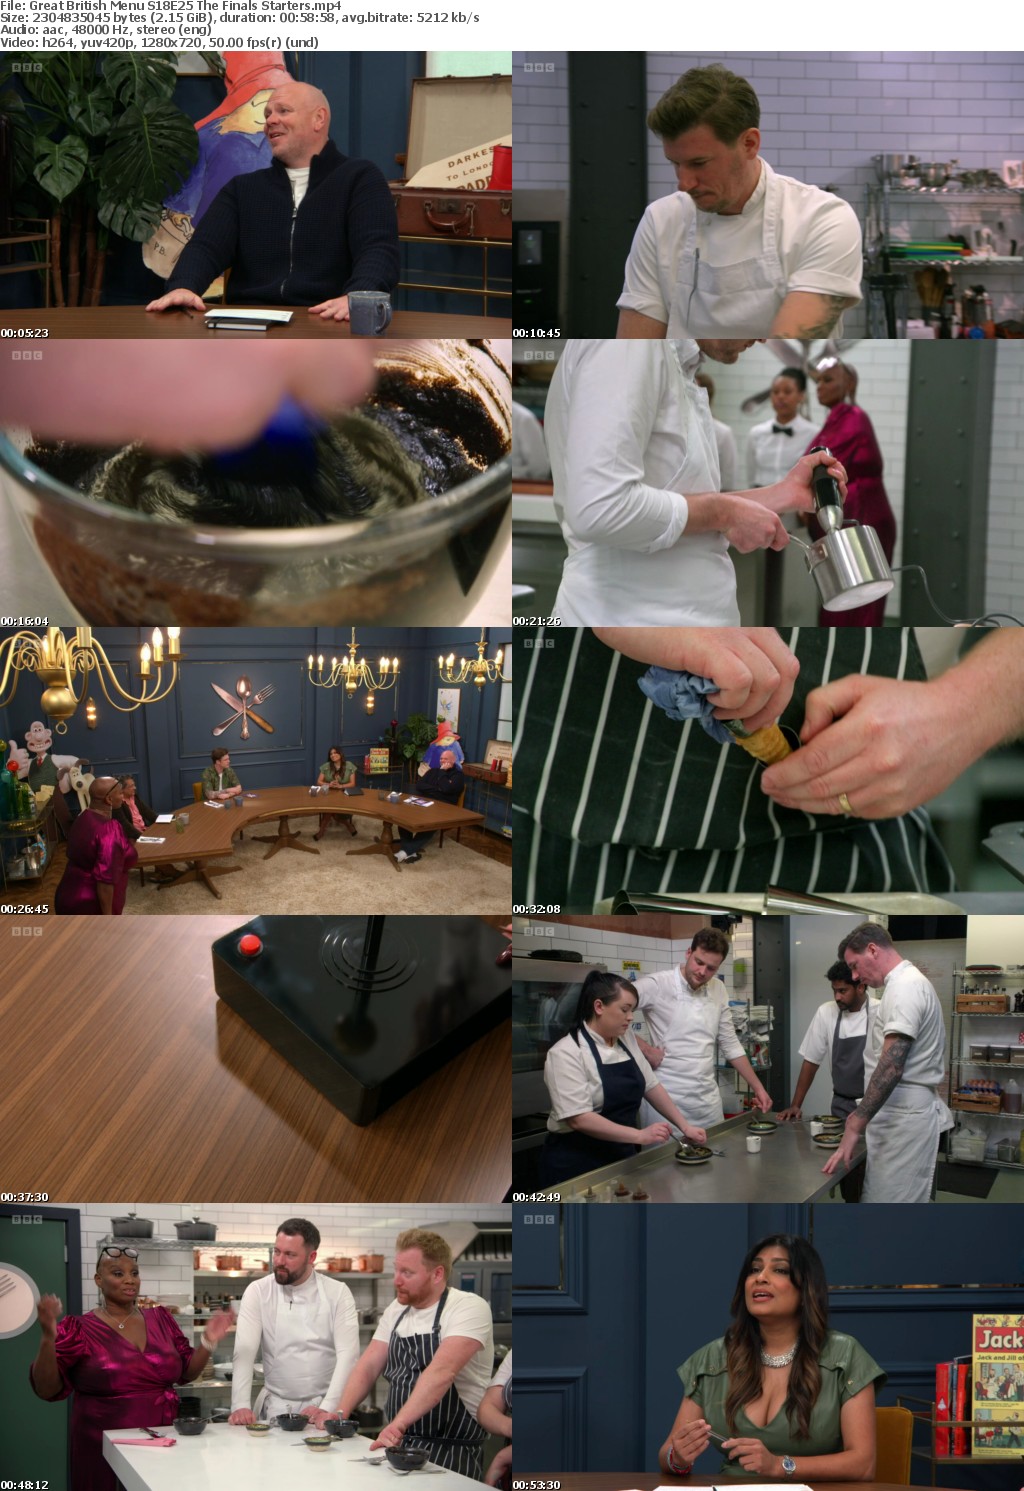 Great British Menu S18E25 The Finals Starters (1280x720p HD, 50fps, soft Eng subs)